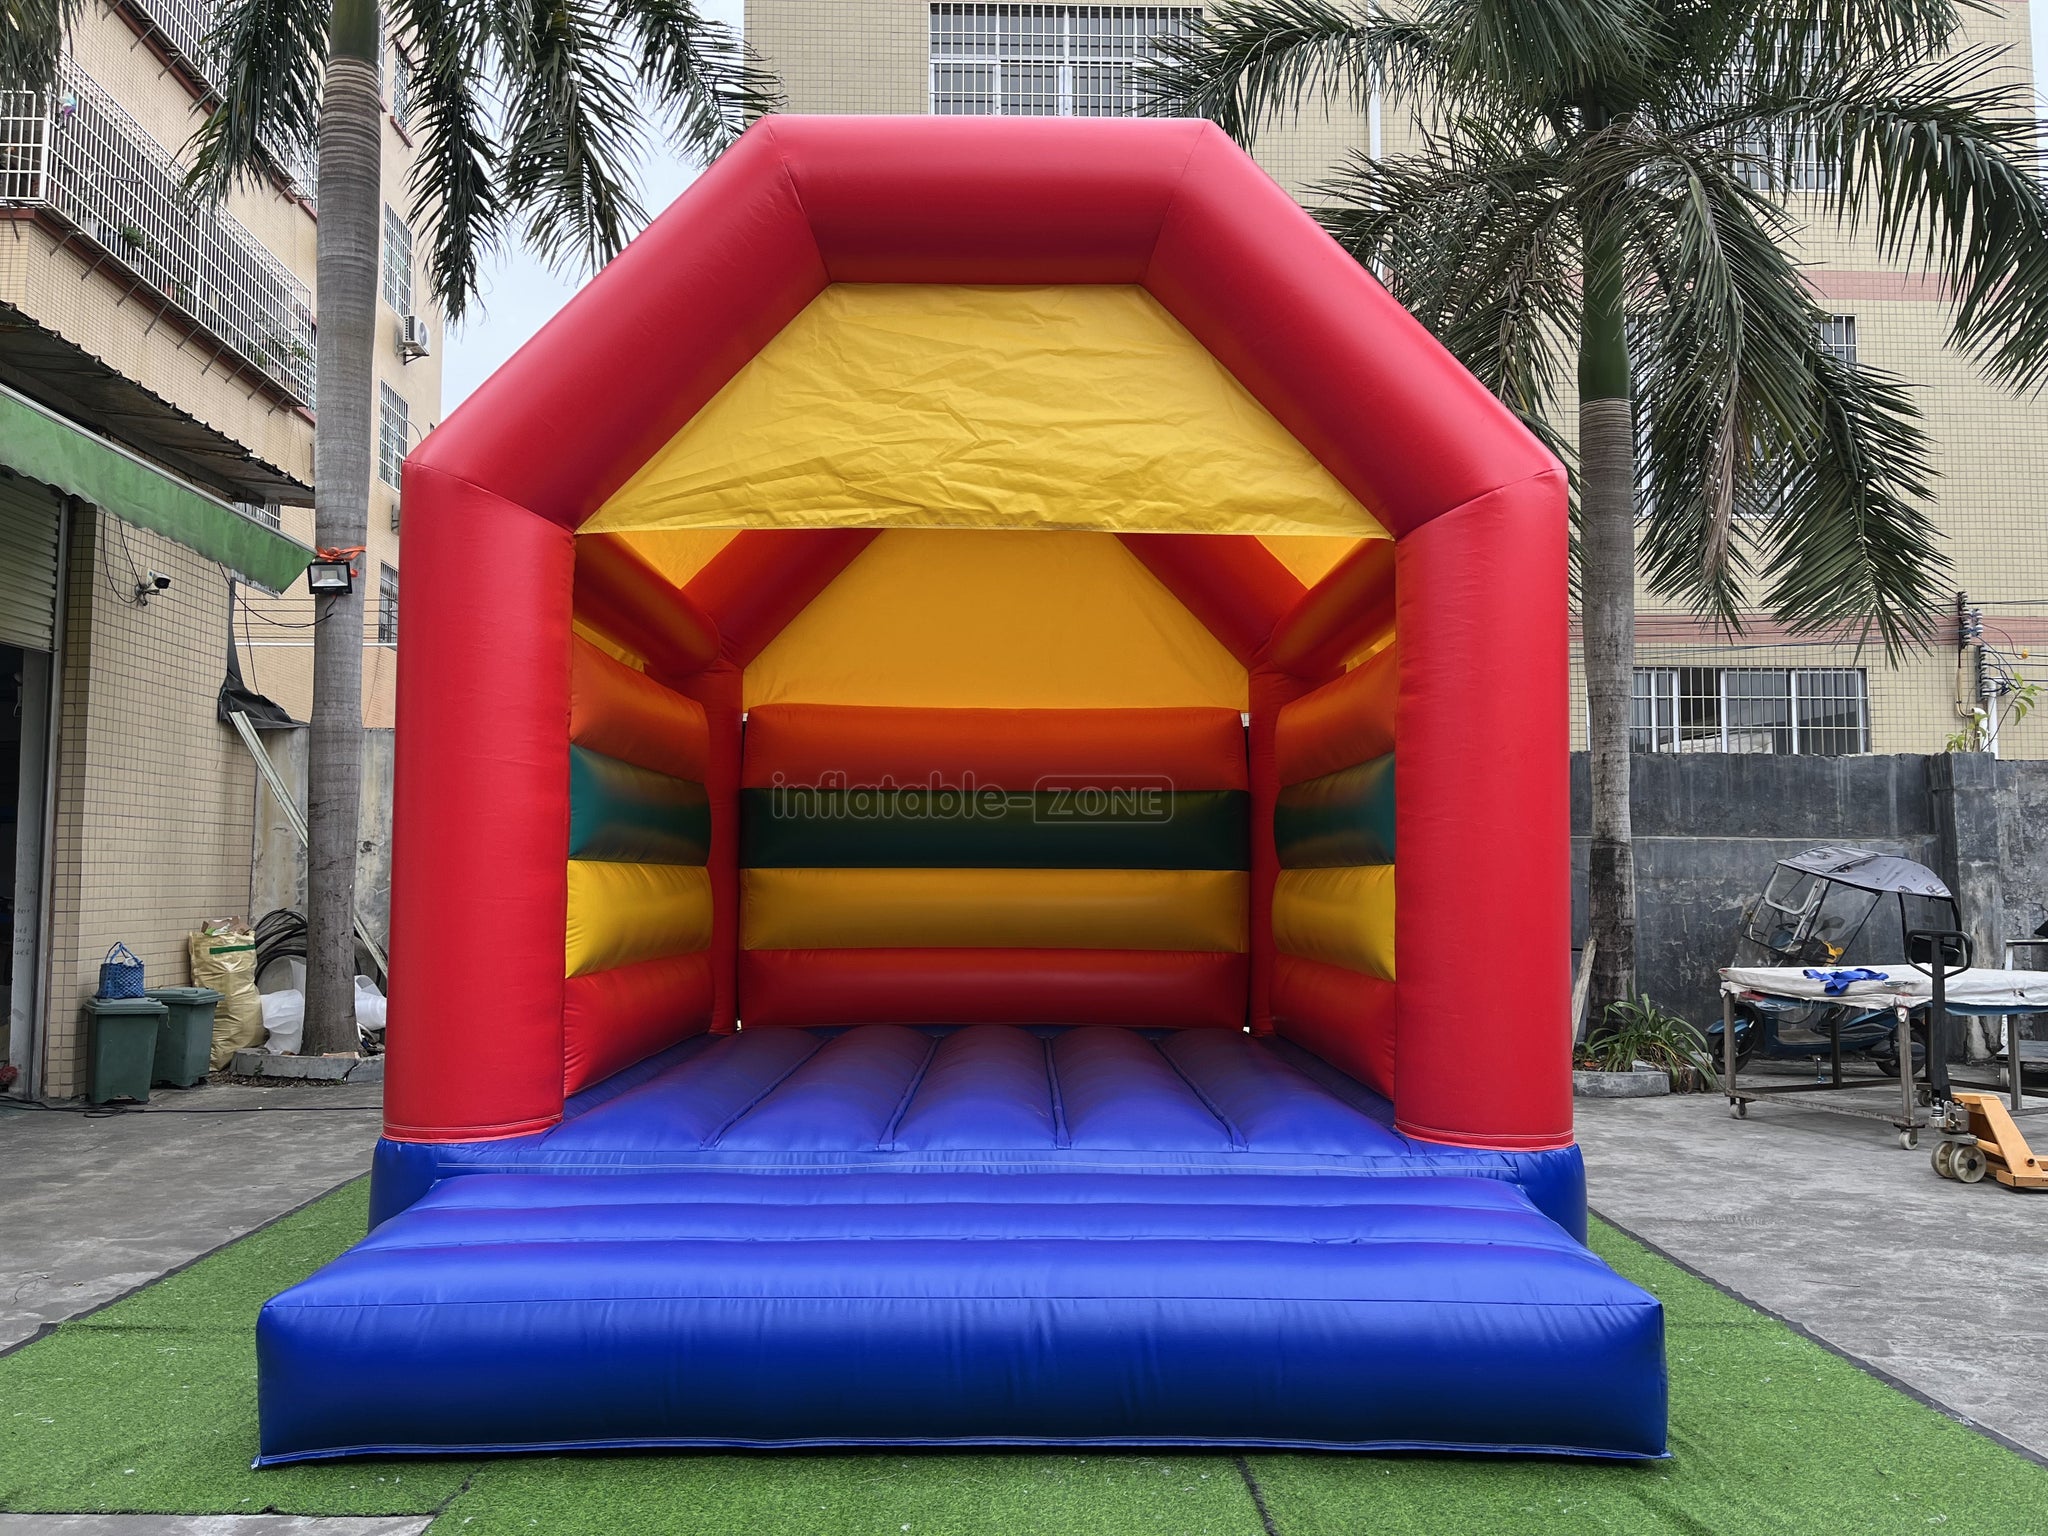 Inflatable Colorful Bounce House Jumping Bouncer Price Best Bouncy Castle For Kids Party